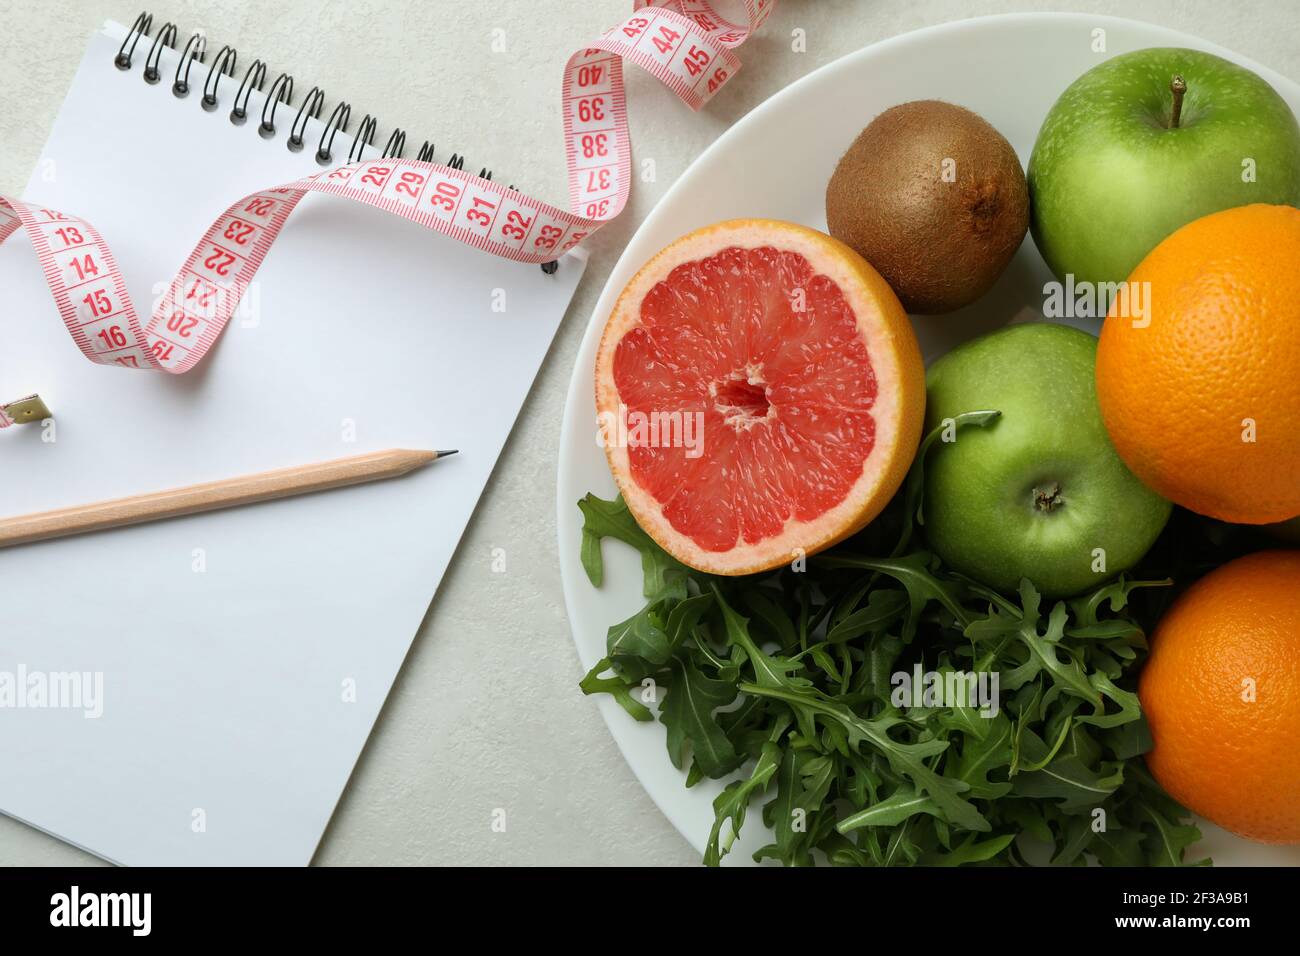 https://c8.alamy.com/comp/2F3A9B1/weight-loss-accessories-on-white-textured-background-close-up-2F3A9B1.jpg